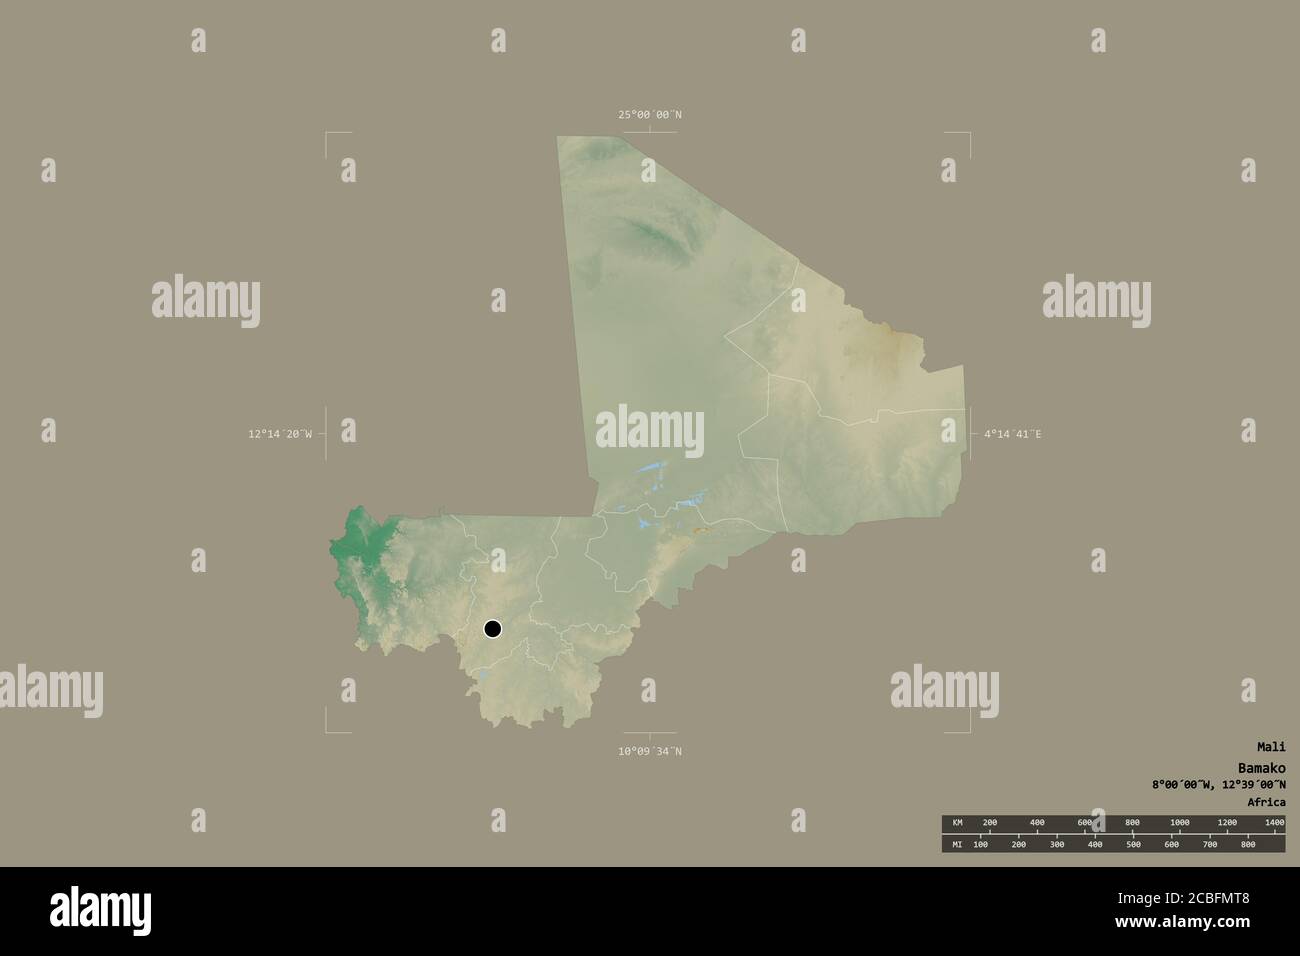 Area of Mali isolated on a solid background in a georeferenced bounding box. Main regional division, distance scale, labels. Topographic relief map. 3 Stock Photo